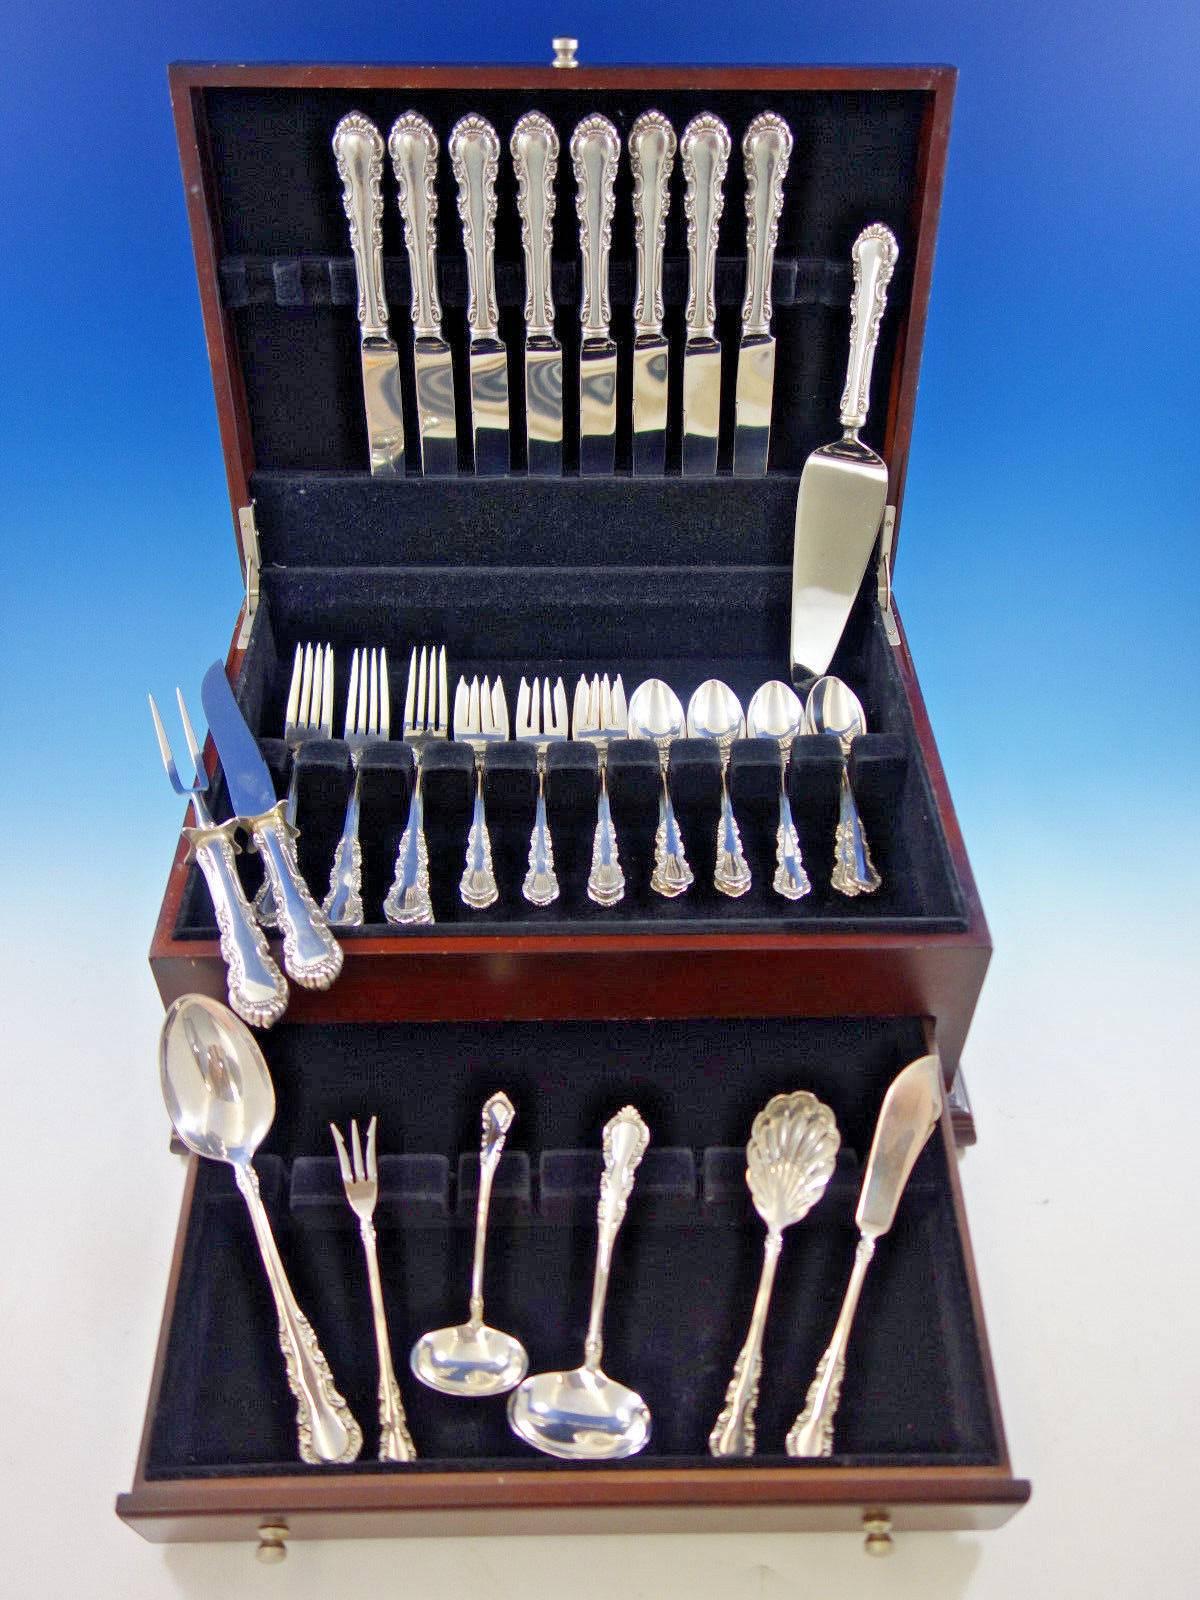 Dinner size Georgian rose by Reed and Barton sterling silver flatware set, 41 pieces. This dinner size set has extra large and impressive forks and knives. This set includes: 

eight dinner size knives, 9 3/4